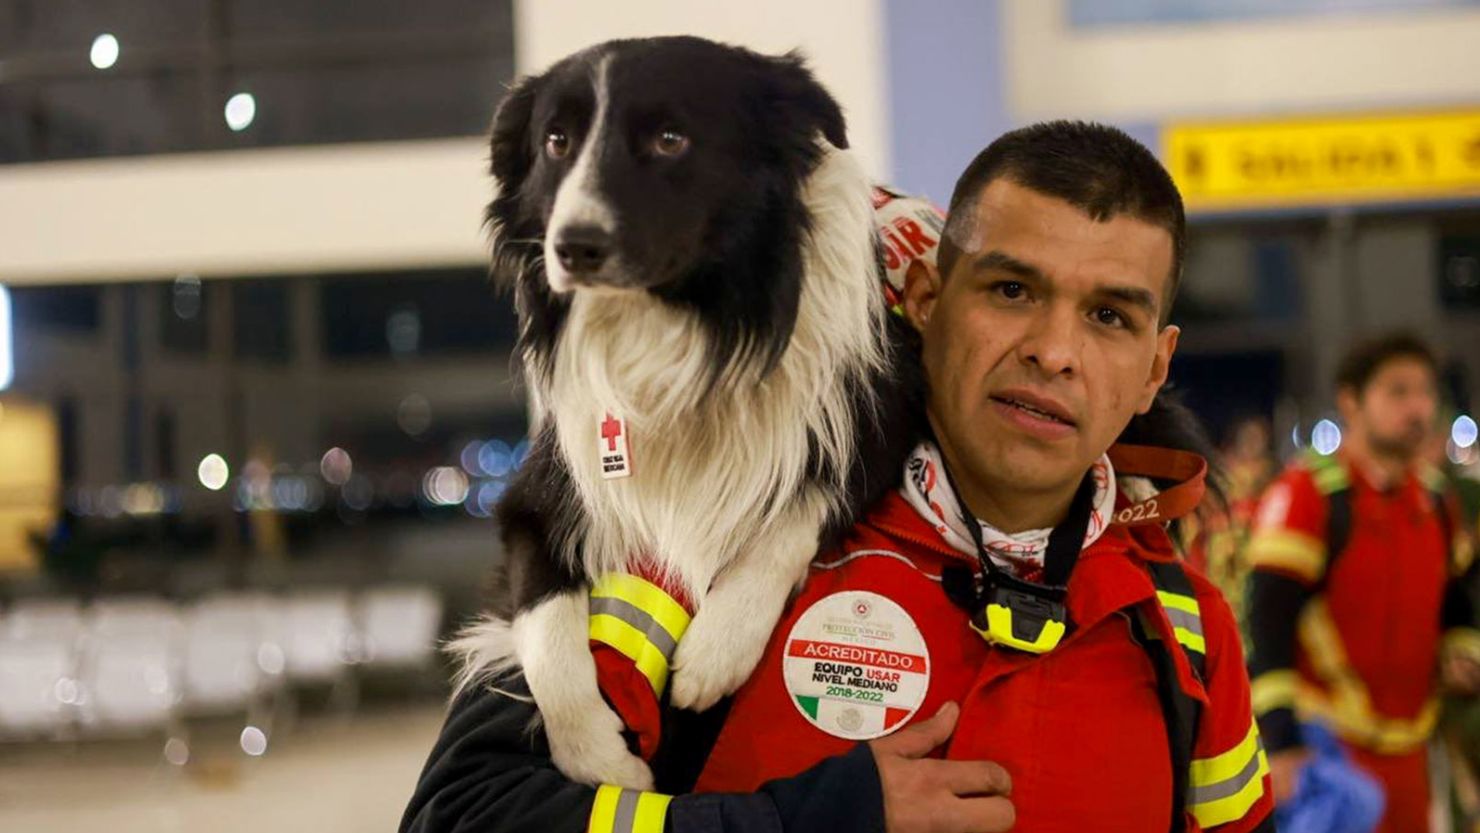 An image tweeted by Mexico's Secretary of Foreign Relations shows a rescue dog and handler as they prepare to assist with rescue operation from the recent earthquake. 